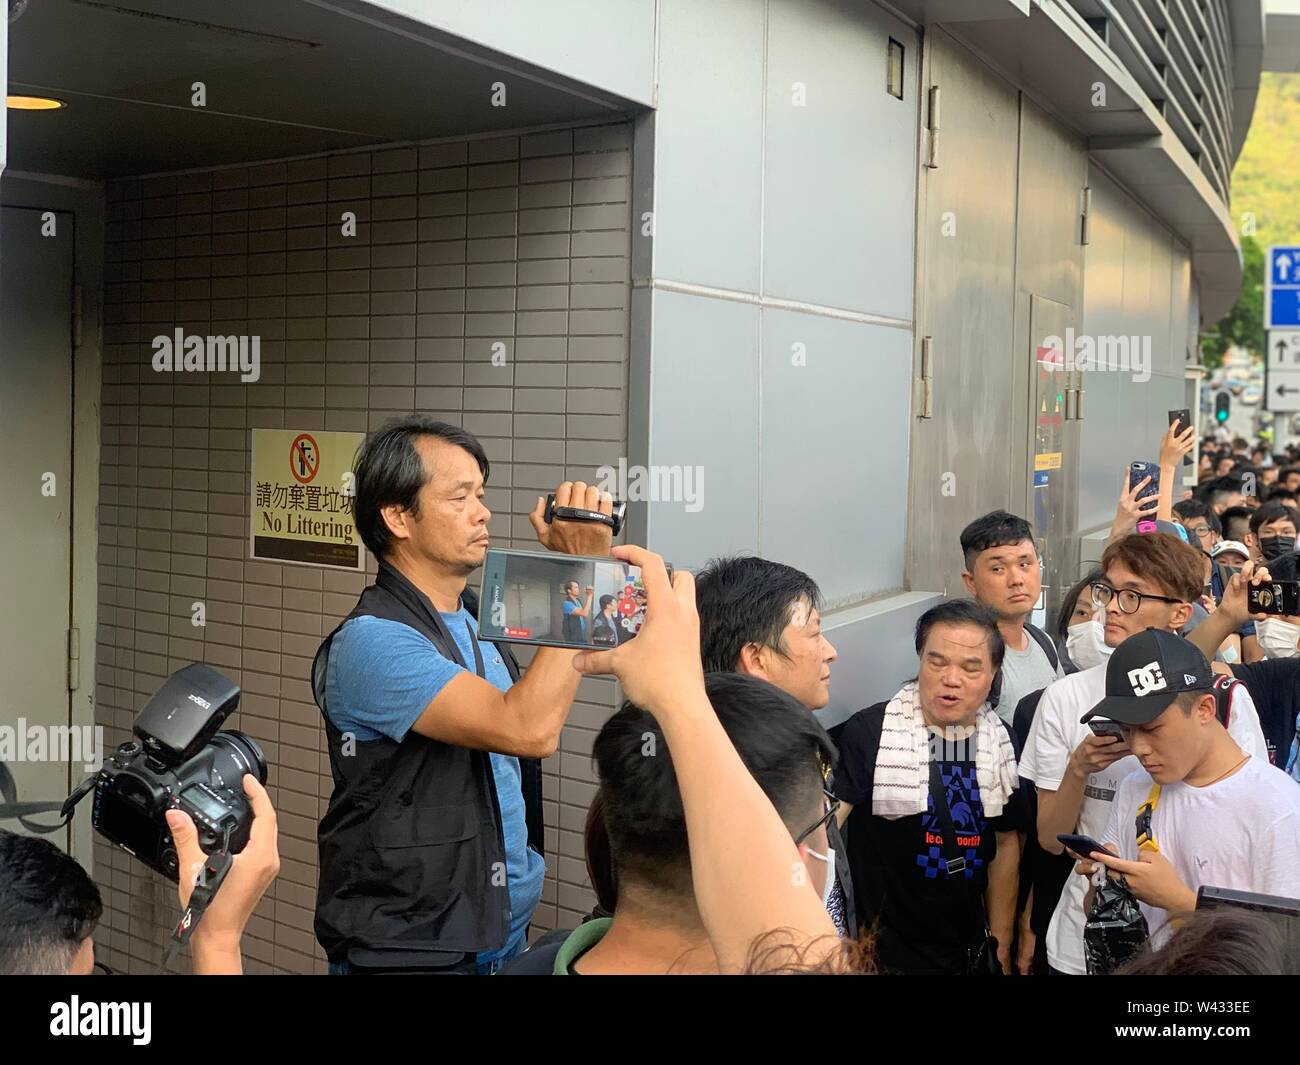 Tuen Mun, Hong Kong-July 6 2019: the police take a video and surround by the  protesters in Tuen Mun .the protesters took to the streets of Hong Kong to oppose a controversial extradition bill. Stock Photo